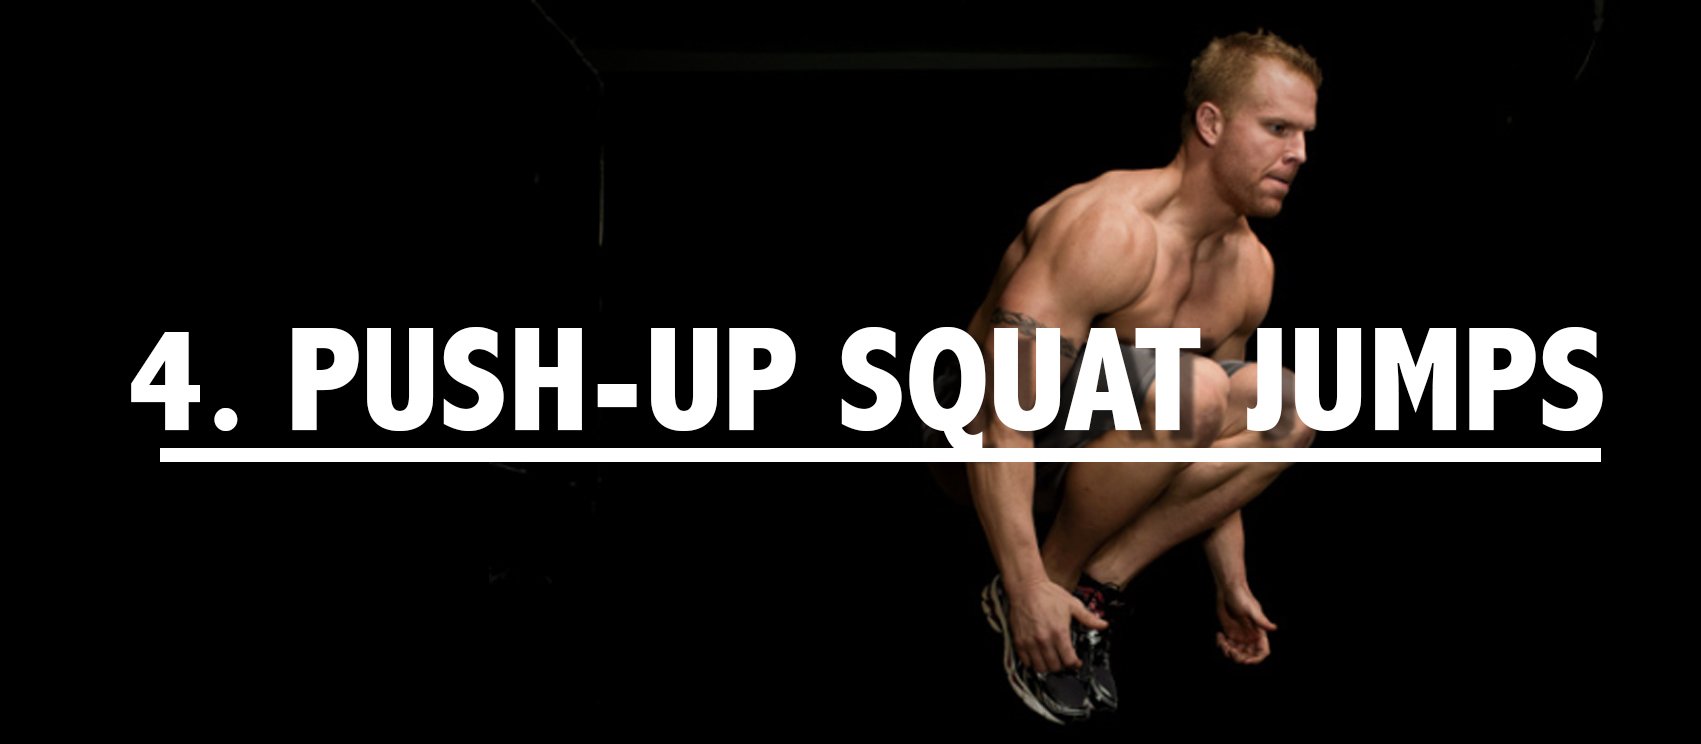 push-up-squat-jumps-for-belly-fat-reduction.jpg